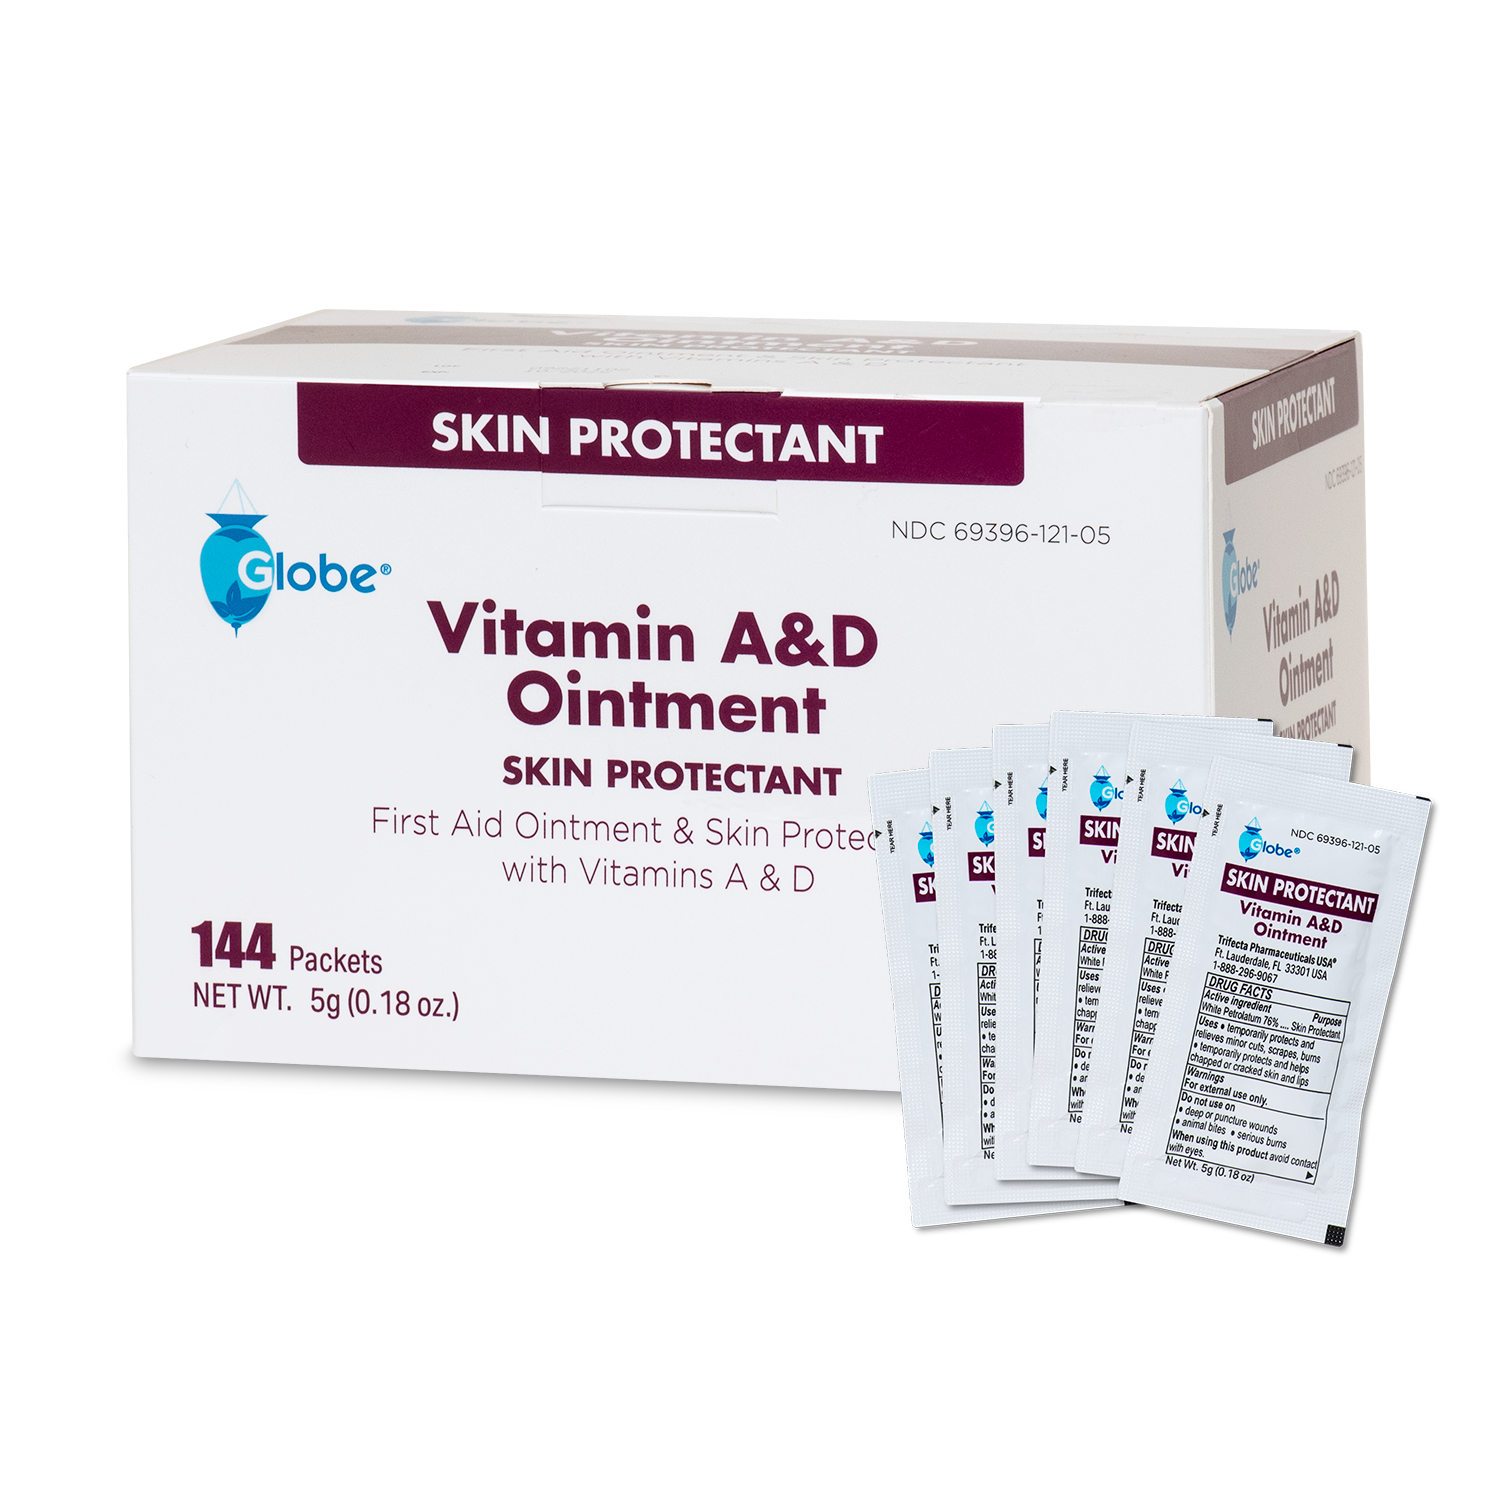 Globe (Box of 144) Vitamin A & D Ointment, First Aid & Skin Protectant with Vitamins A&D, 5g Packets, 144-Packets Box, Lanolin & Petrolatum Formula fo 976